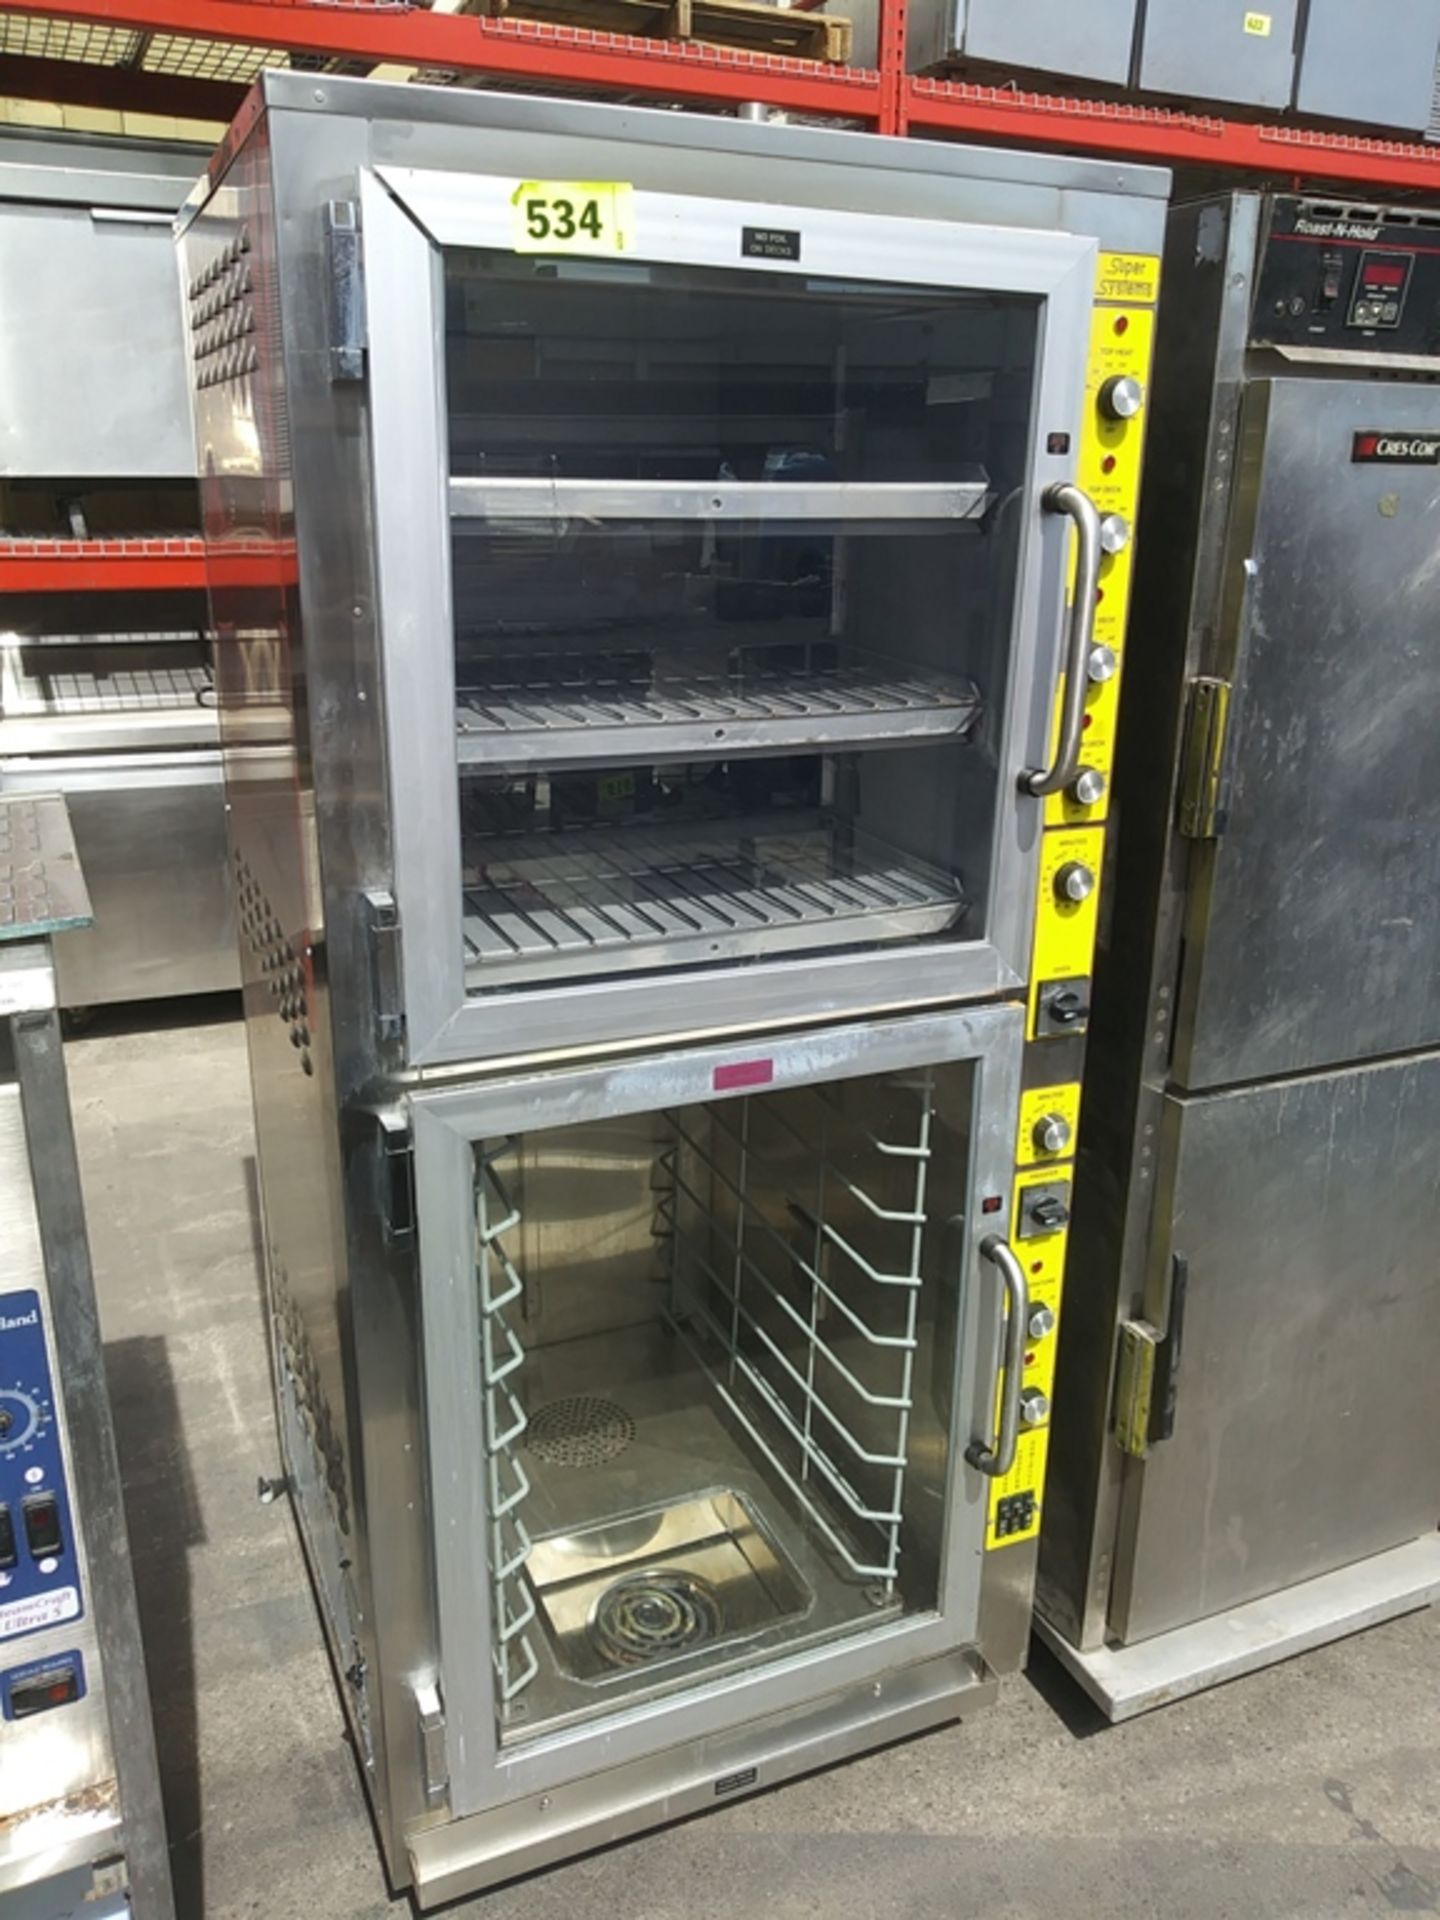 SUPERSYSTEMS 3 DECK CONVECTION OVEN (MODEL: OP-3-TS)